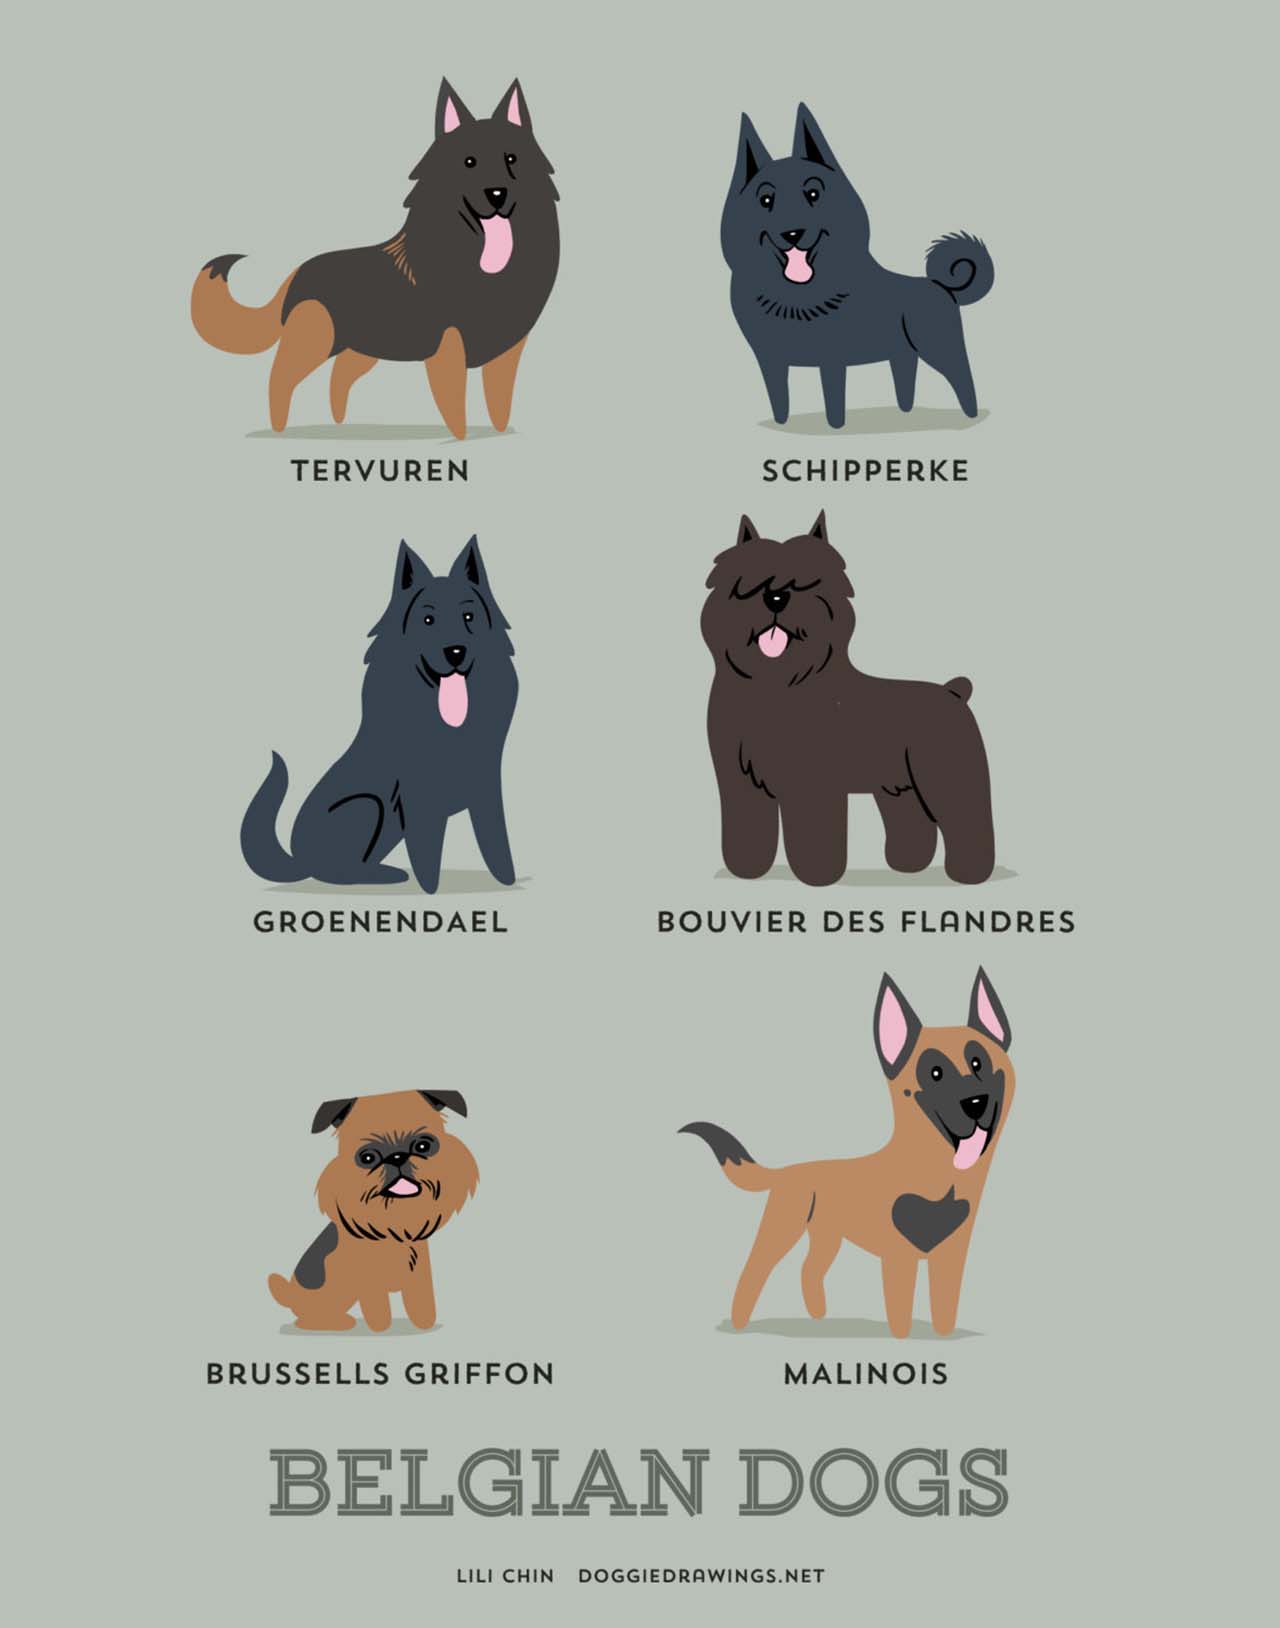 Origin Of Dogs: Cute Illustration By Lili Chin Show Where Dog Breeds Originating From #4: Belgian Dogs